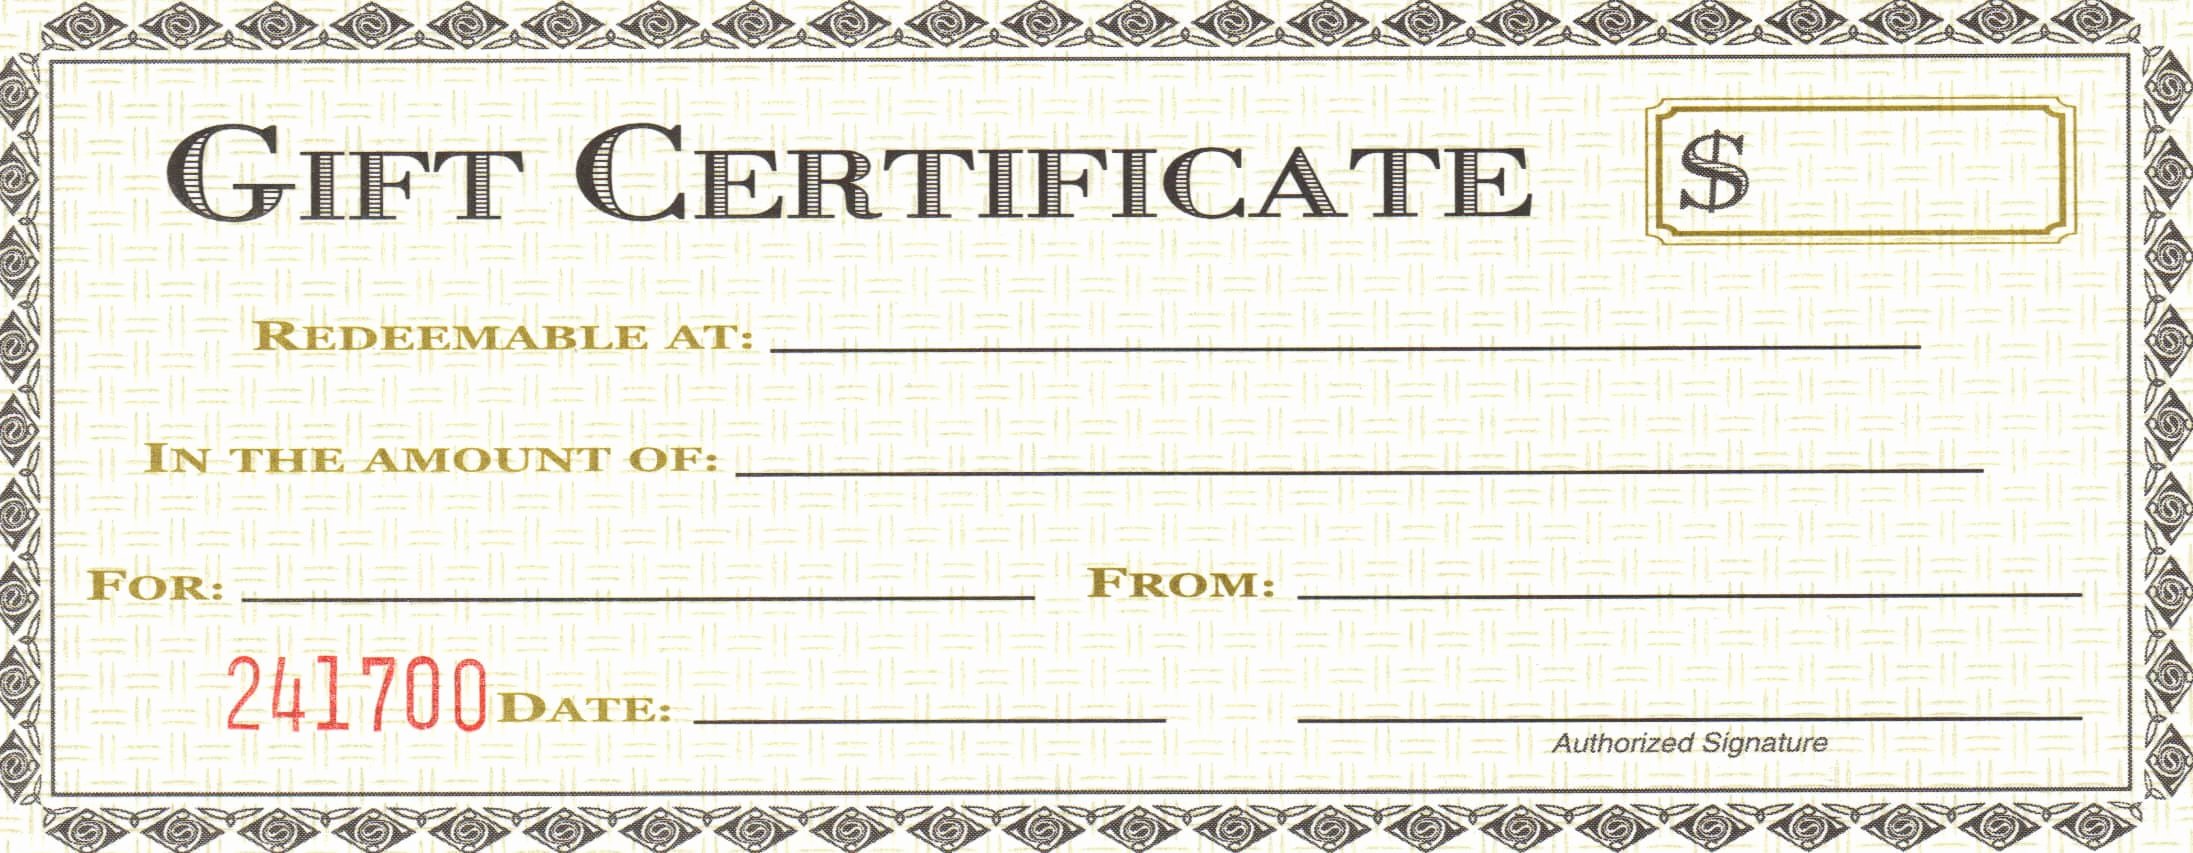 Gift Certificate Template Pages Lovely 18 Gift Certificate Templates Excel Pdf formats